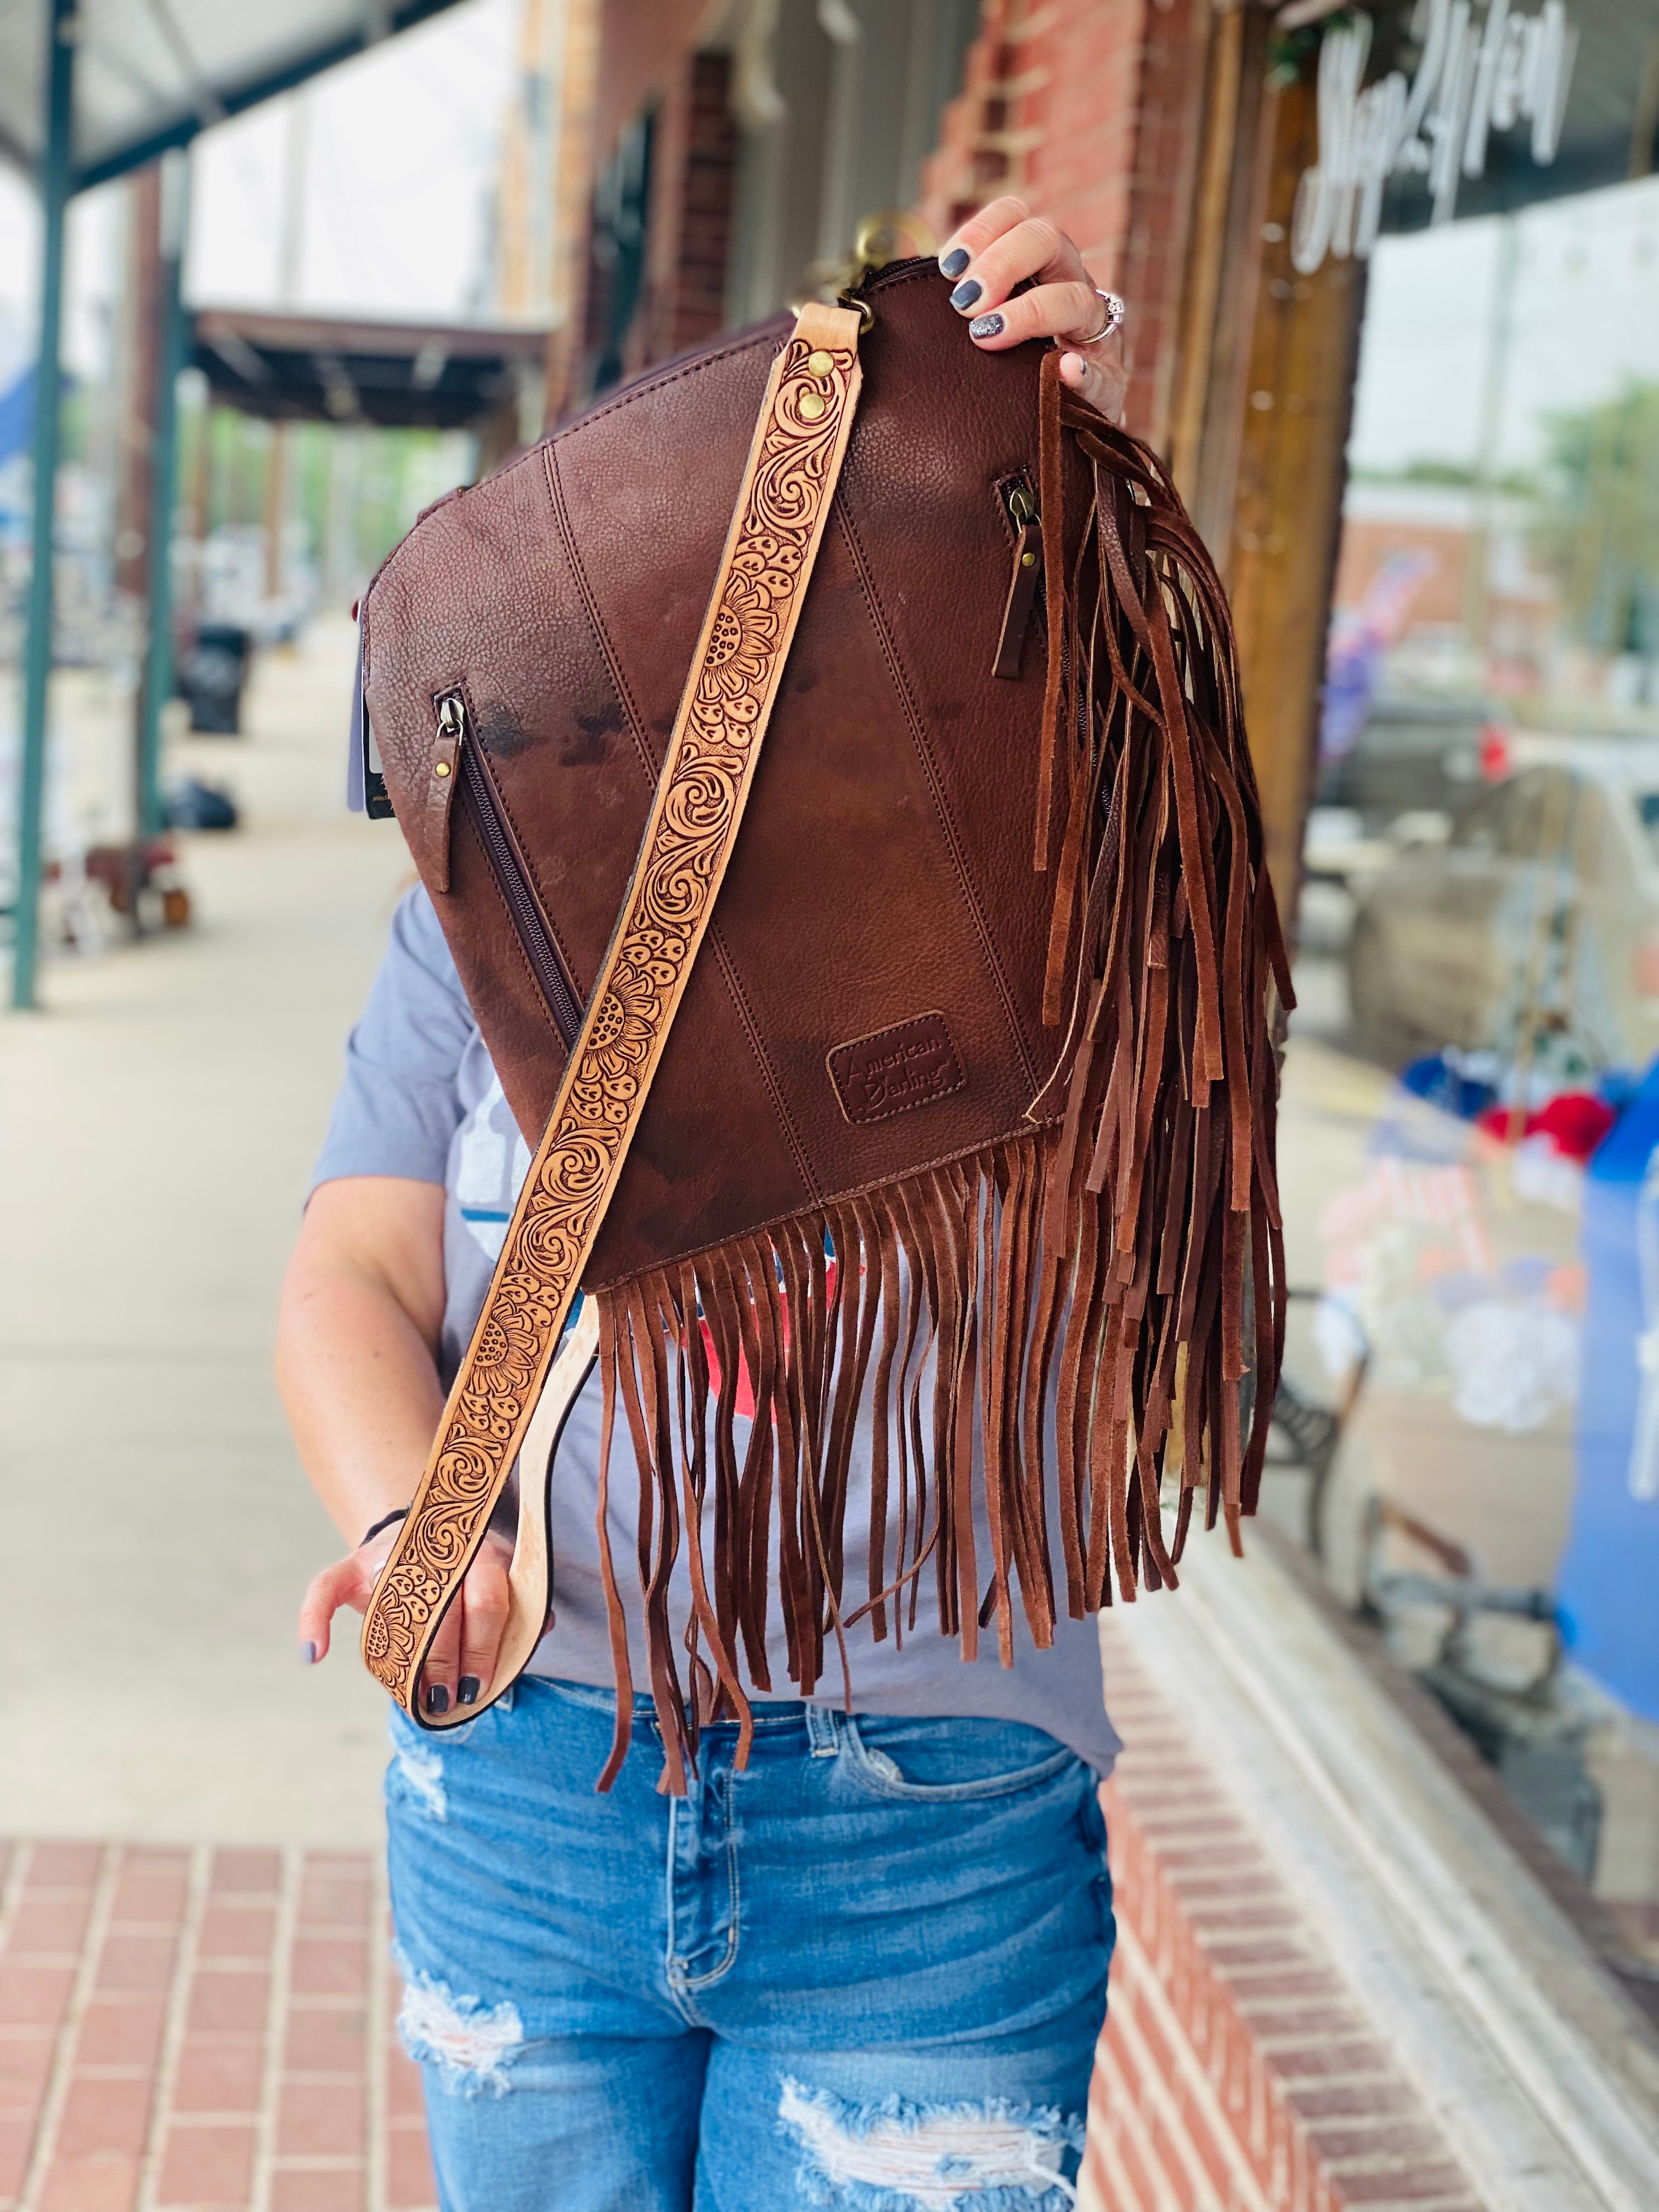 American Darling Brown and White Fringe Cross Body Purse